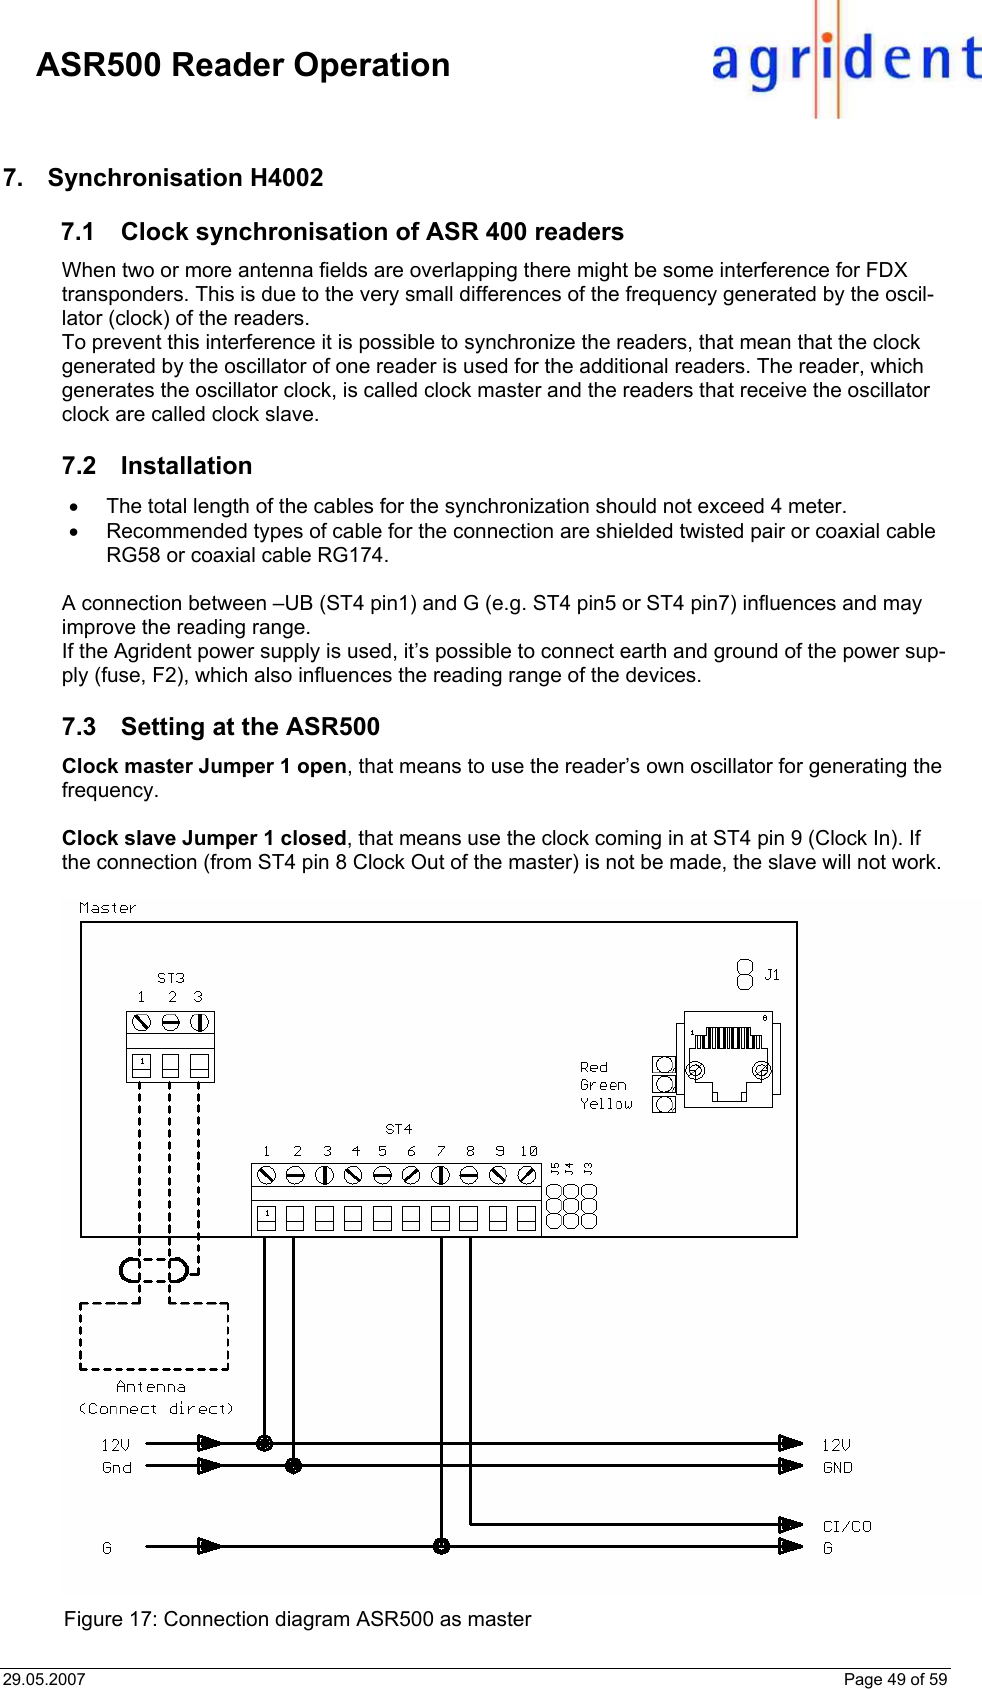 29.05.2007    Page 49 of 59     ASR500 Reader Operation 7. Synchronisation H4002 7.1 Clock synchronisation of ASR 400 readers When two or more antenna fields are overlapping there might be some interference for FDX transponders. This is due to the very small differences of the frequency generated by the oscil-lator (clock) of the readers. To prevent this interference it is possible to synchronize the readers, that mean that the clock generated by the oscillator of one reader is used for the additional readers. The reader, which generates the oscillator clock, is called clock master and the readers that receive the oscillator clock are called clock slave.   7.2 Installation •  The total length of the cables for the synchronization should not exceed 4 meter. •  Recommended types of cable for the connection are shielded twisted pair or coaxial cable RG58 or coaxial cable RG174.  A connection between –UB (ST4 pin1) and G (e.g. ST4 pin5 or ST4 pin7) influences and may improve the reading range.  If the Agrident power supply is used, it’s possible to connect earth and ground of the power sup-ply (fuse, F2), which also influences the reading range of the devices.  7.3  Setting at the ASR500 Clock master Jumper 1 open, that means to use the reader’s own oscillator for generating the frequency.  Clock slave Jumper 1 closed, that means use the clock coming in at ST4 pin 9 (Clock In). If the connection (from ST4 pin 8 Clock Out of the master) is not be made, the slave will not work.   Figure 17: Connection diagram ASR500 as master 